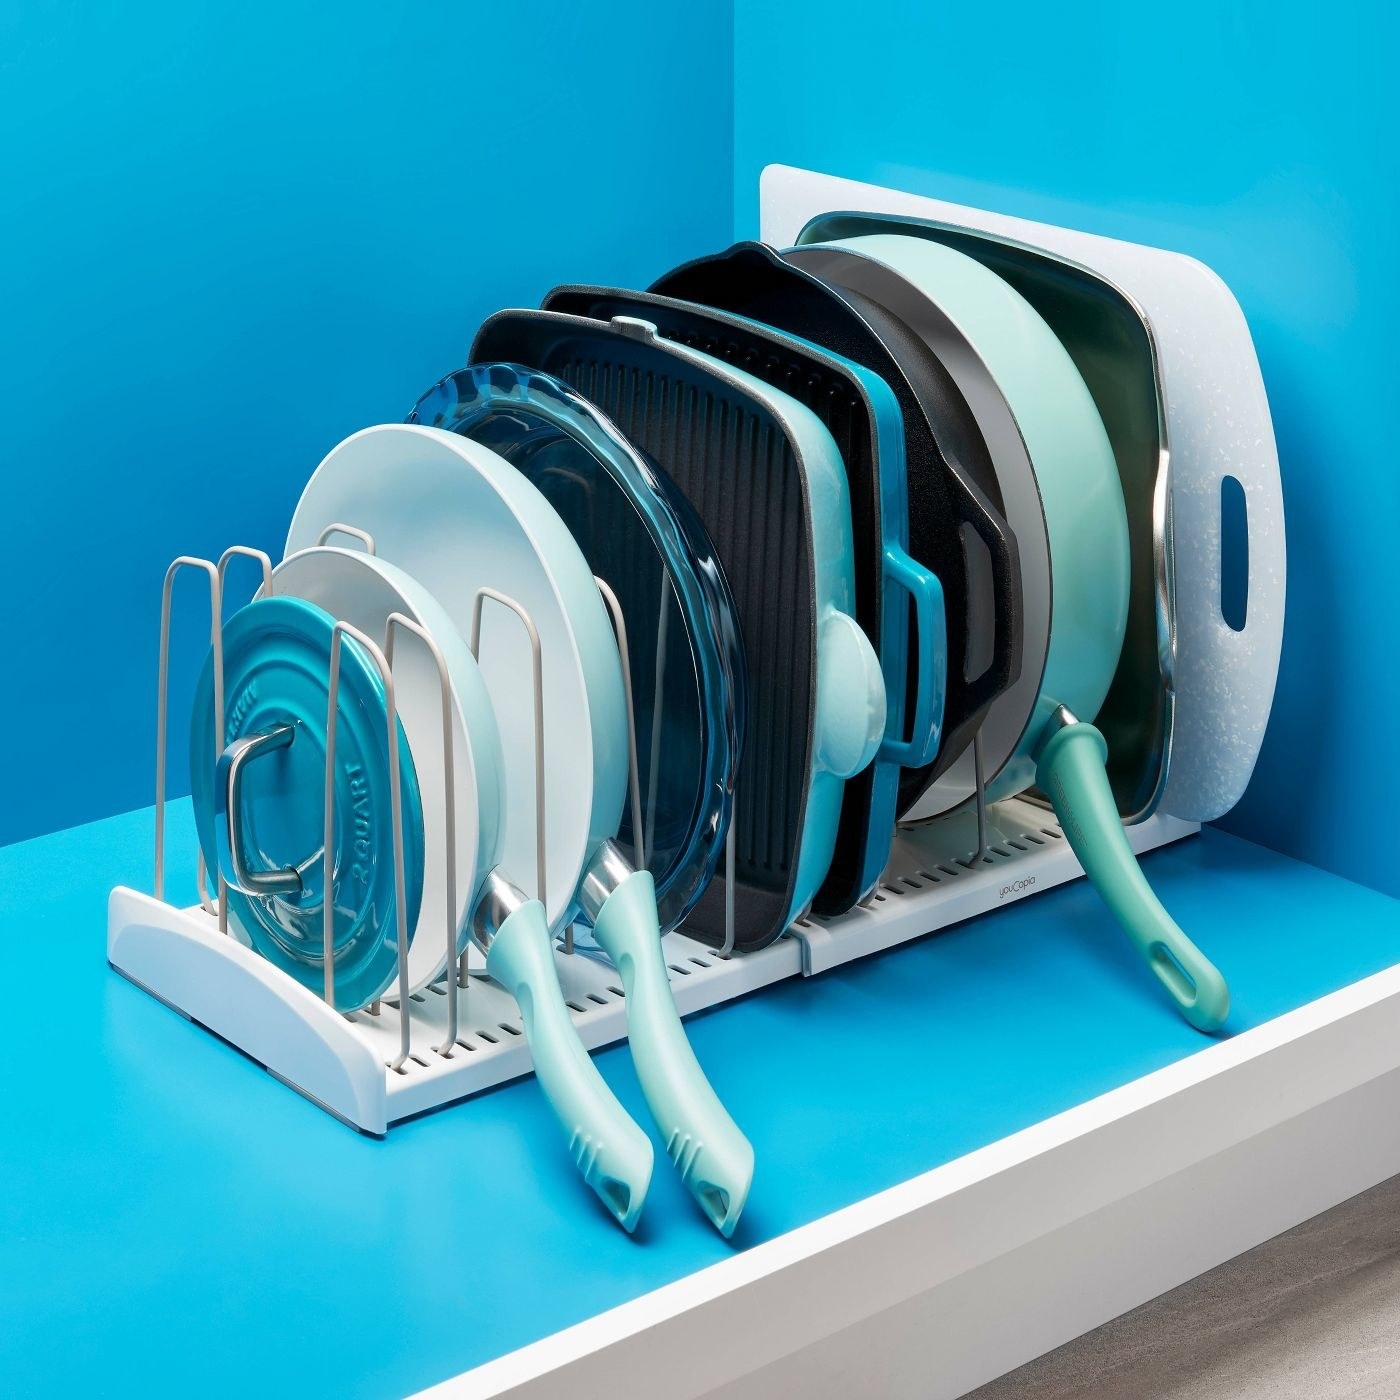 The expandable cookware rack